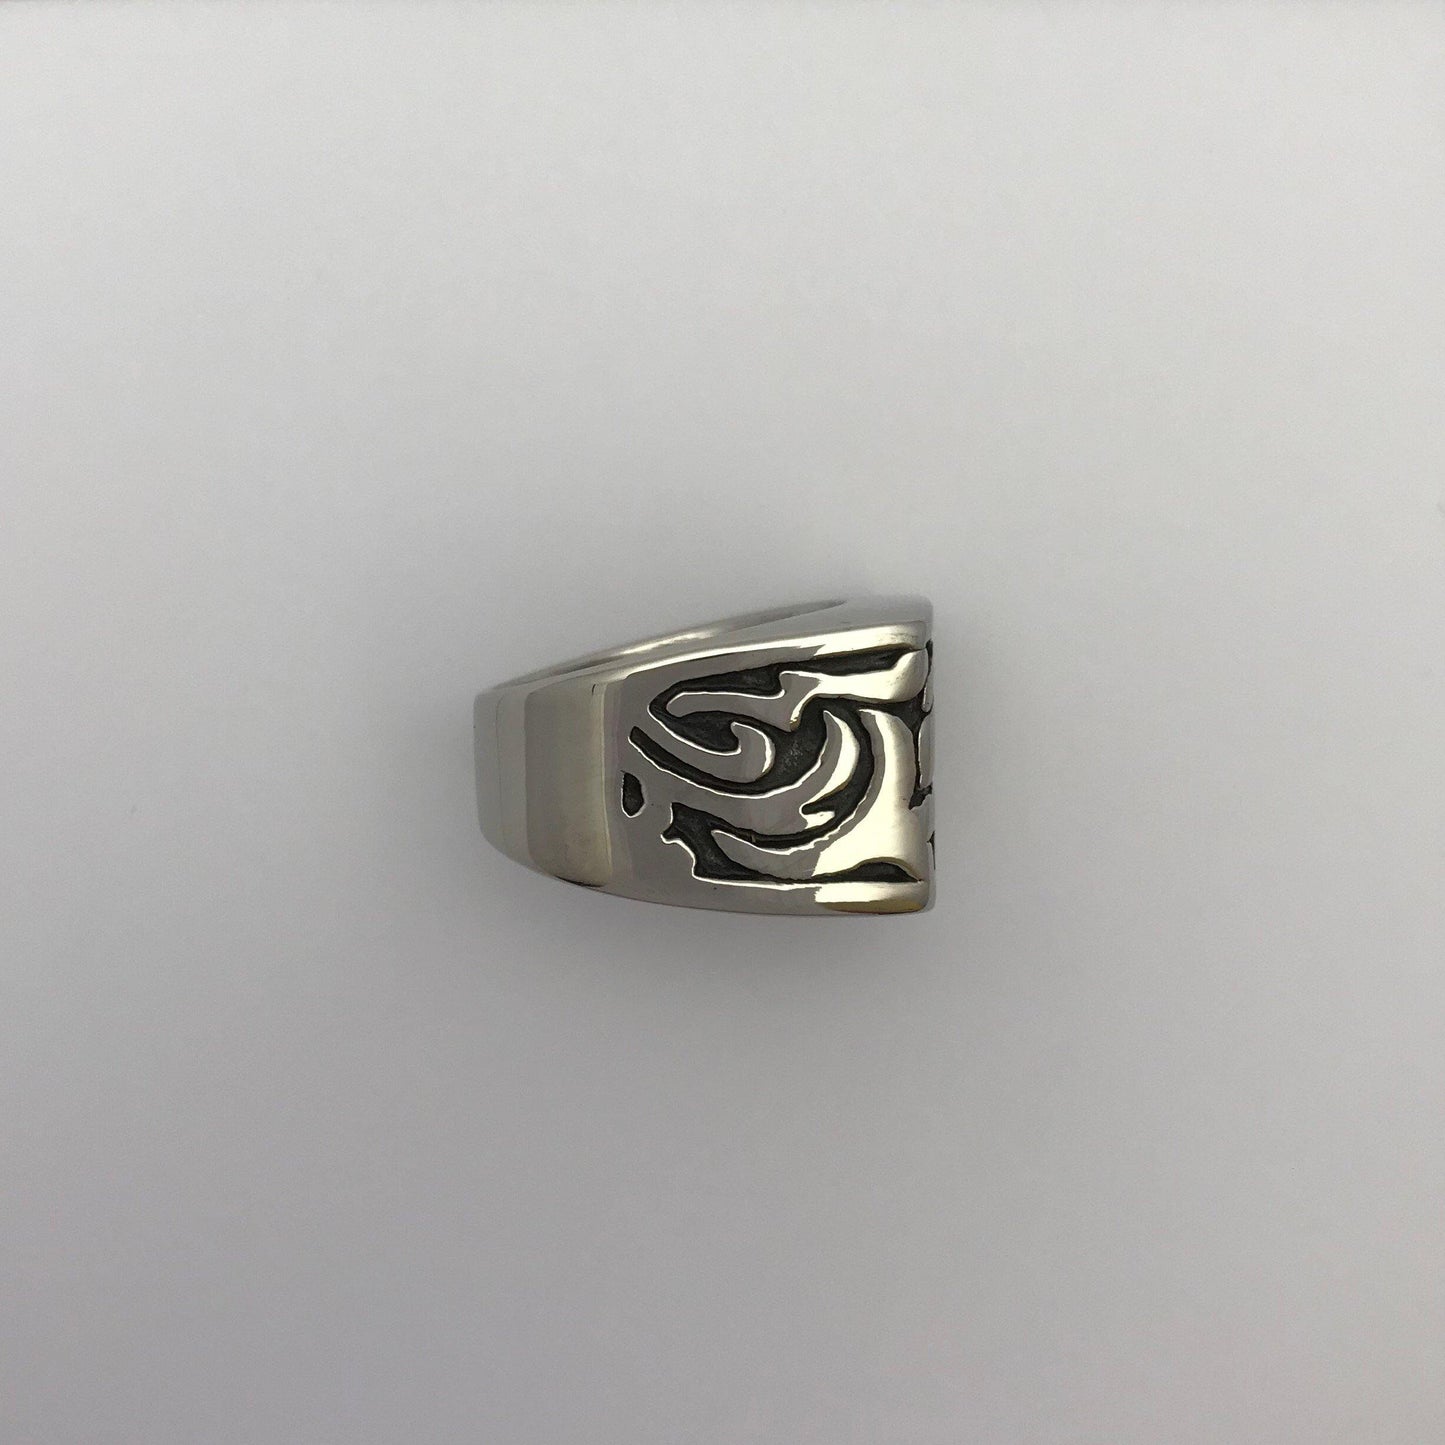 Filigree Ring - Big Dog Steel Surgical Stainless Steel